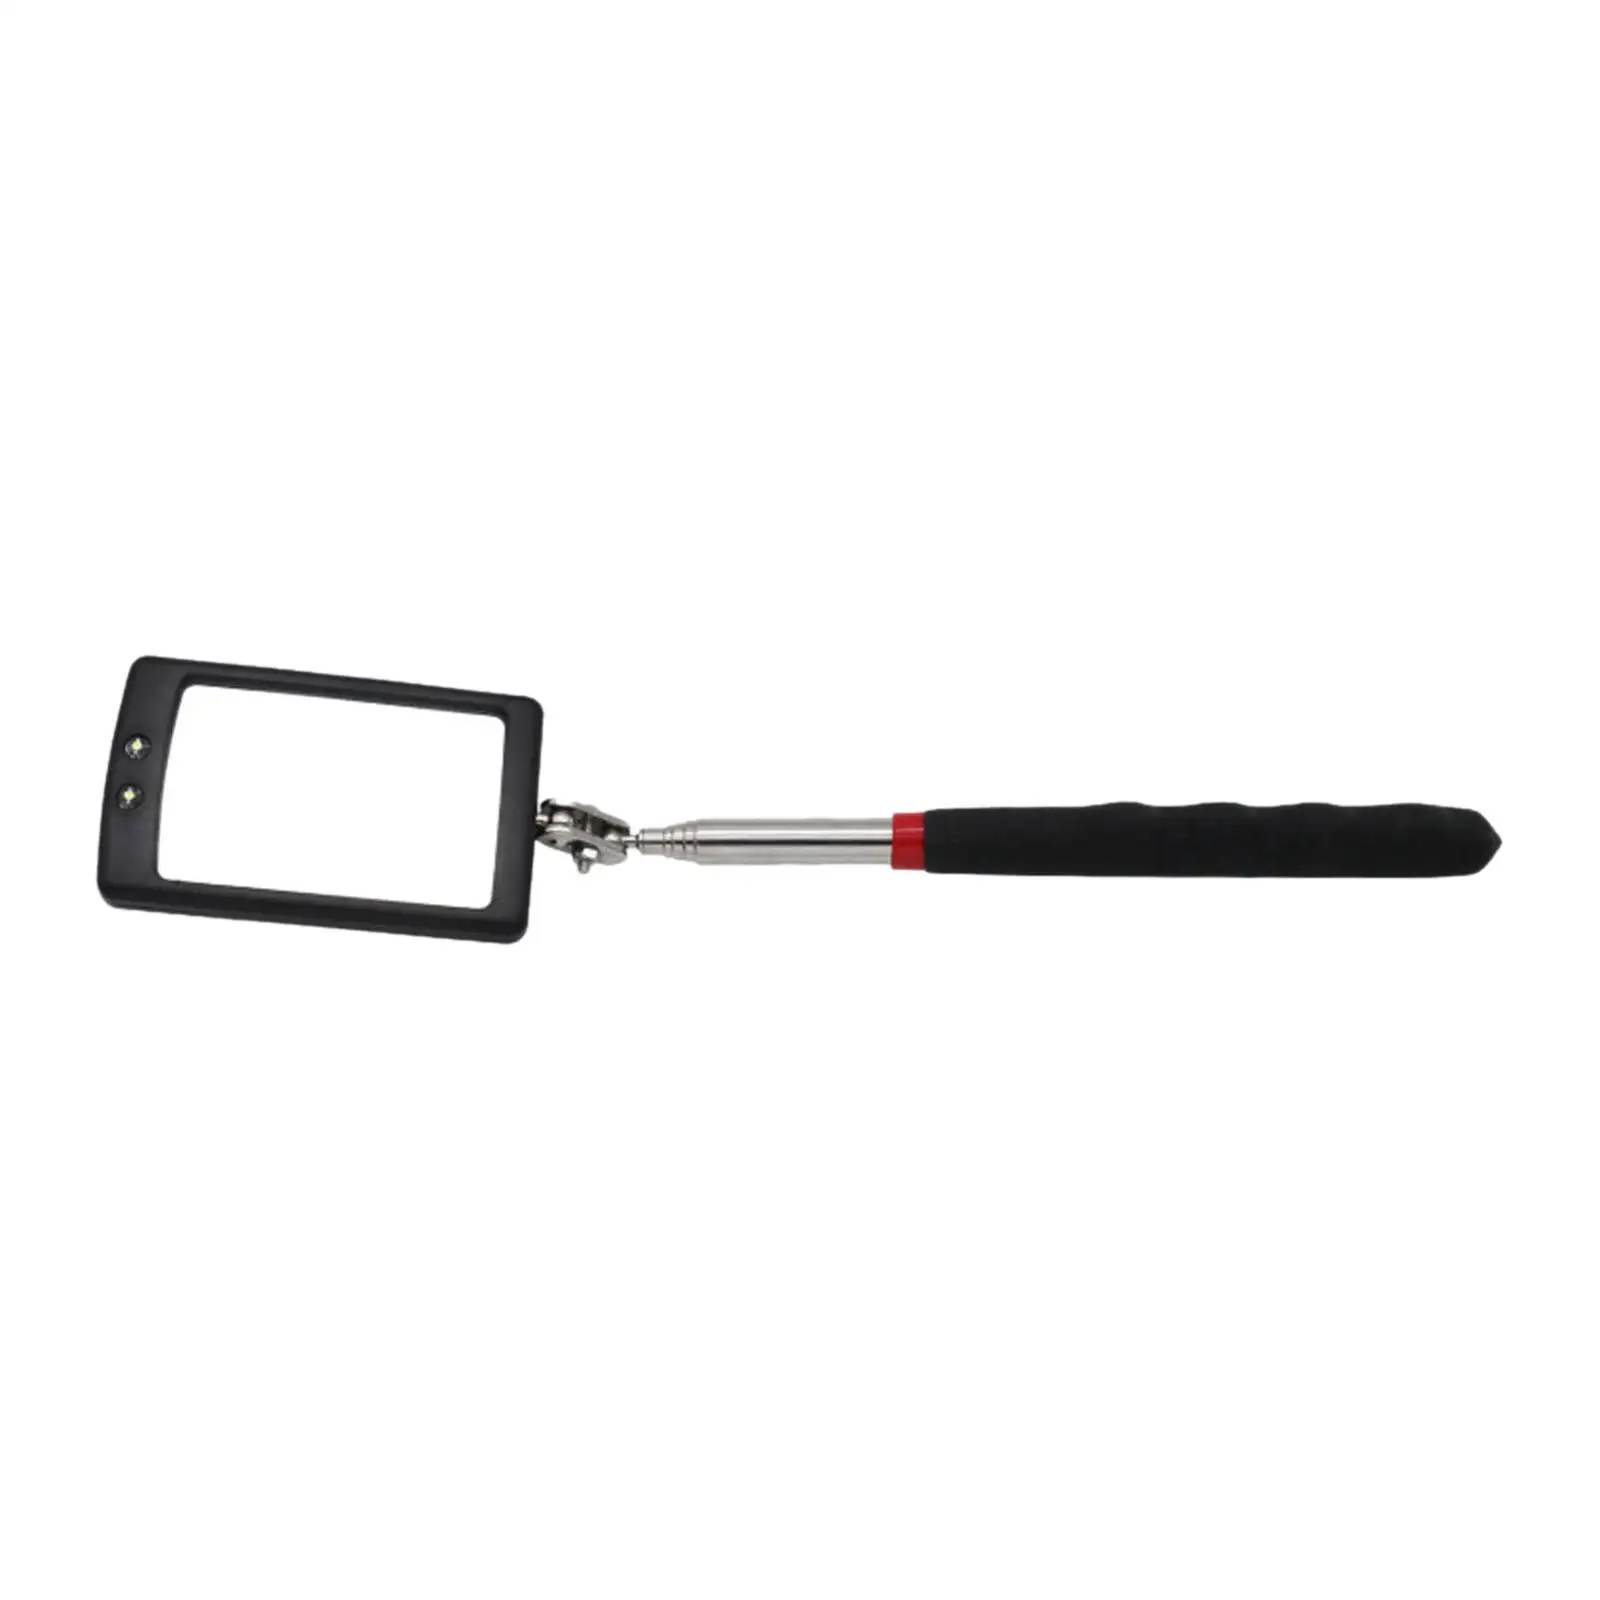 Inspection Mirror Portable LED Lighted Inspection Mirror for Home Inspector Home Use Mouth Mechanical Checking Vehicle